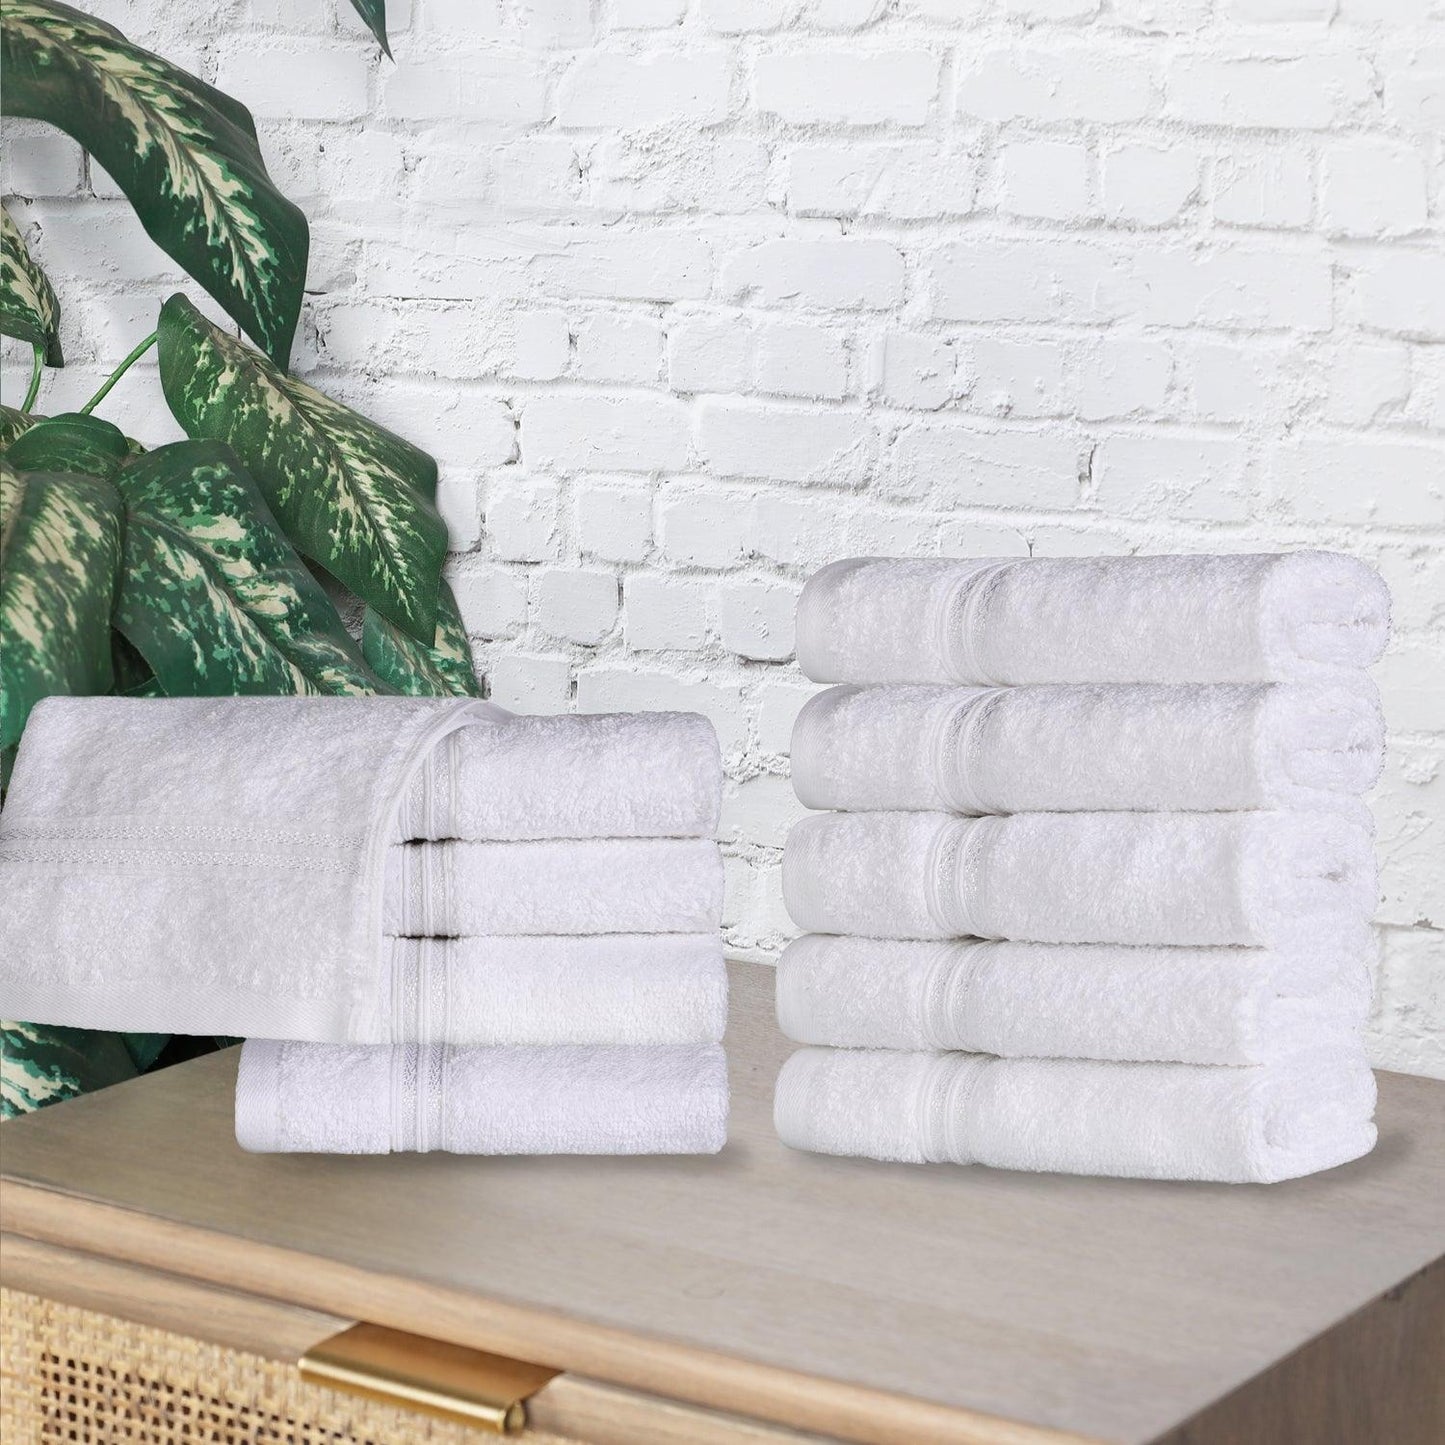 Egyptian Cotton 600 GSM, 10-Piece Face Towel Set FredCo